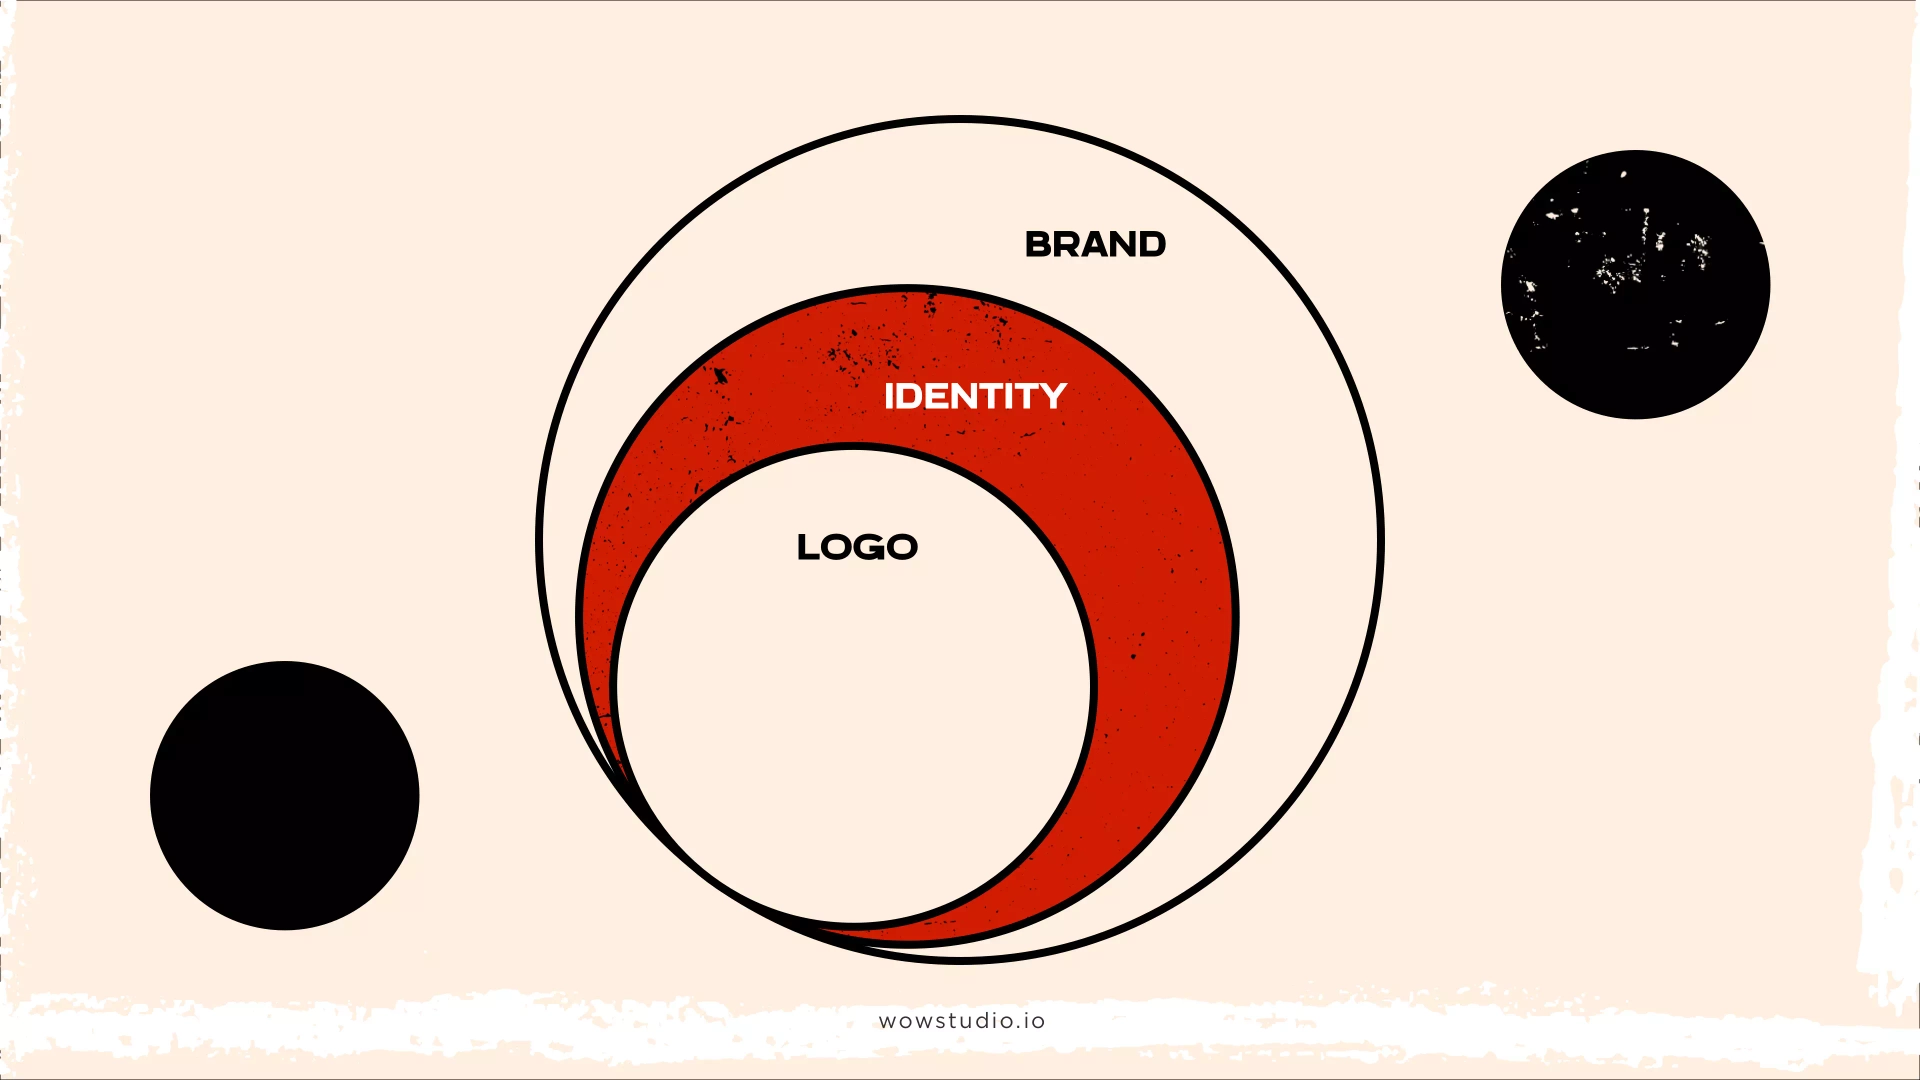 Why is Brand Identity crucial for a business’ success? wow-studio